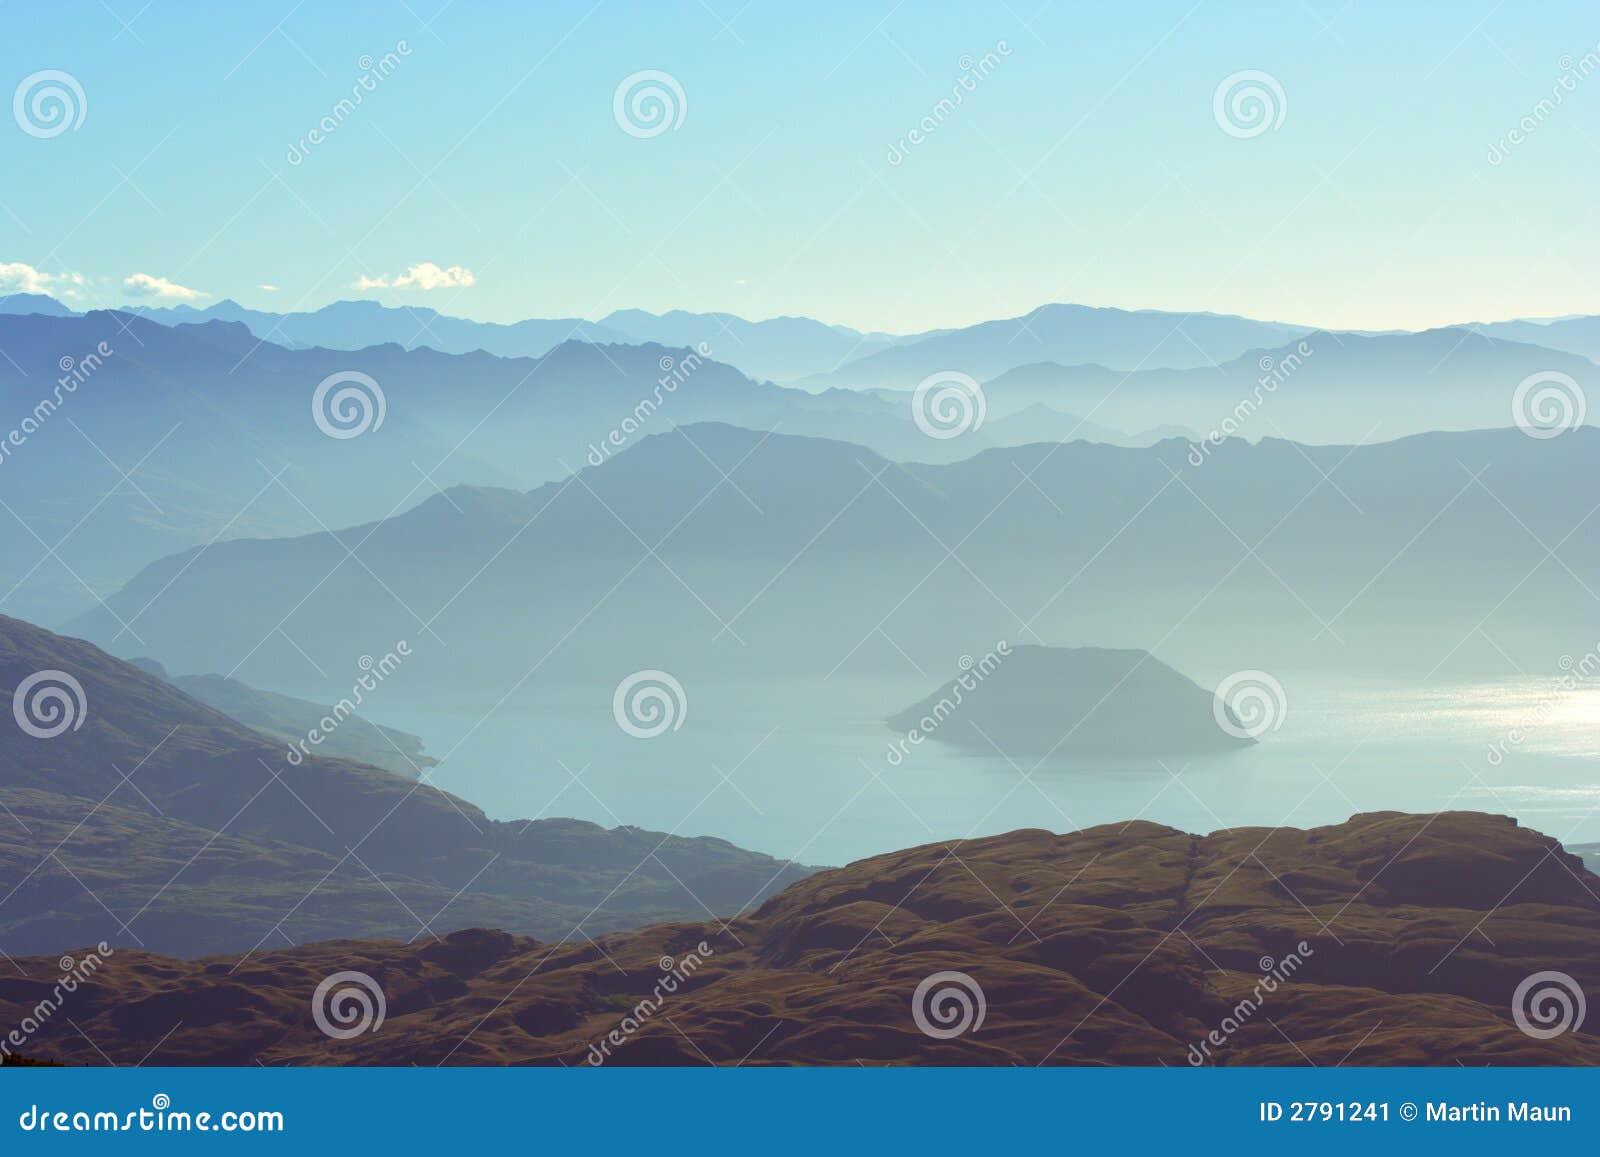 distant mountains and lake